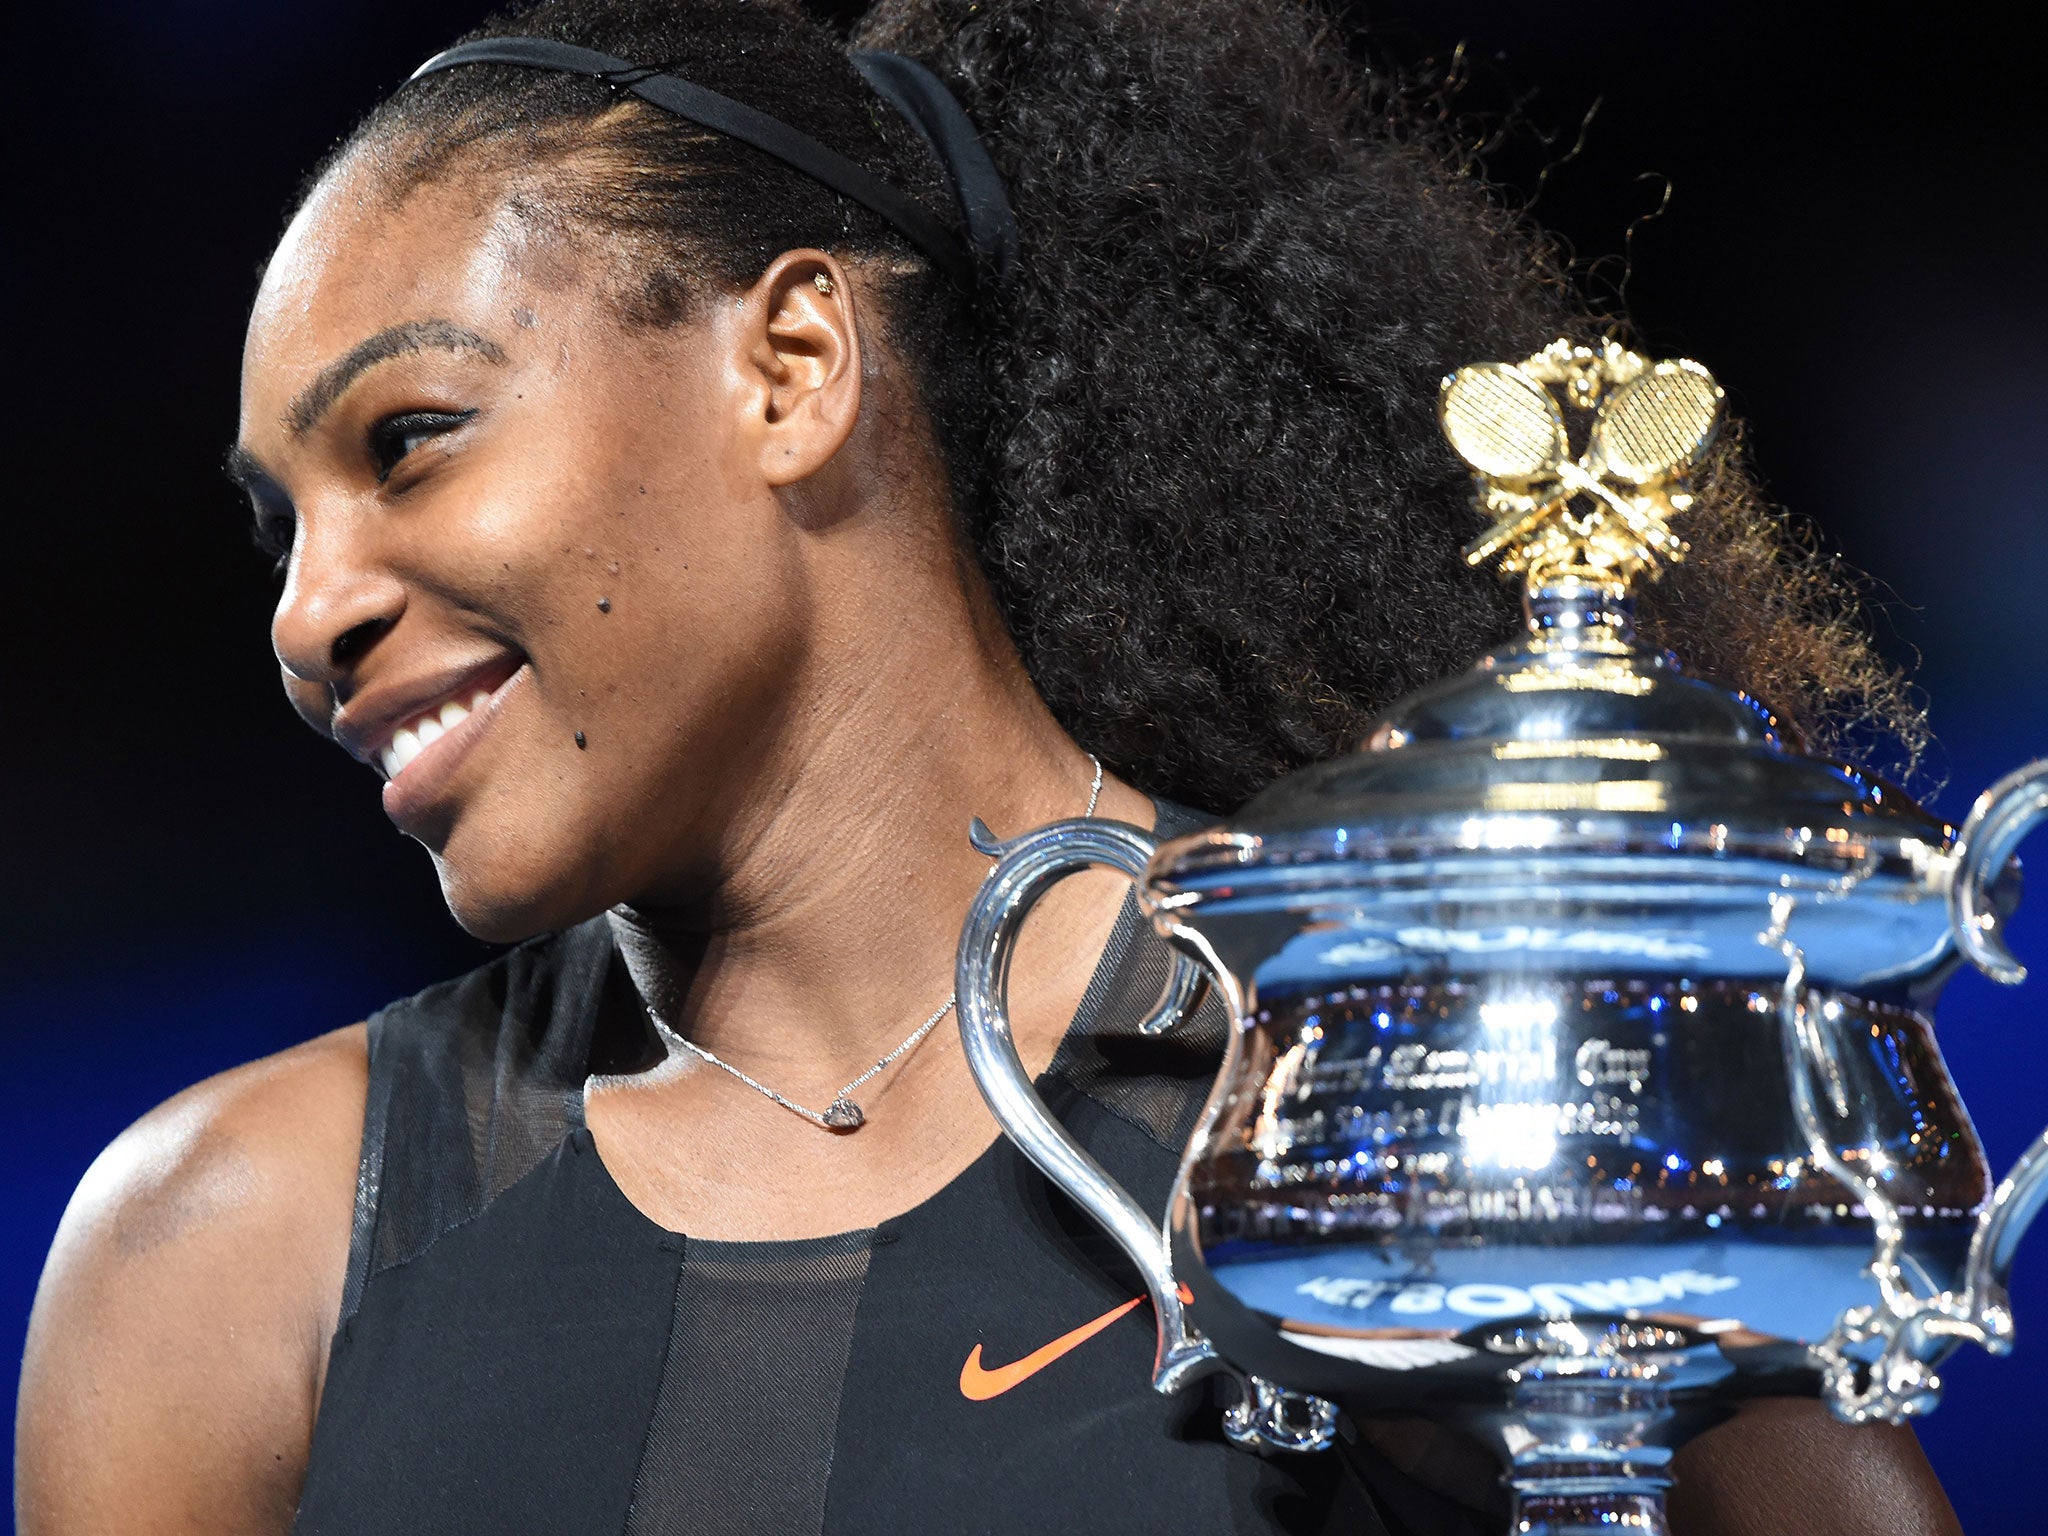 Serena Williams only found out about her pregnancy two days before the Australian Open